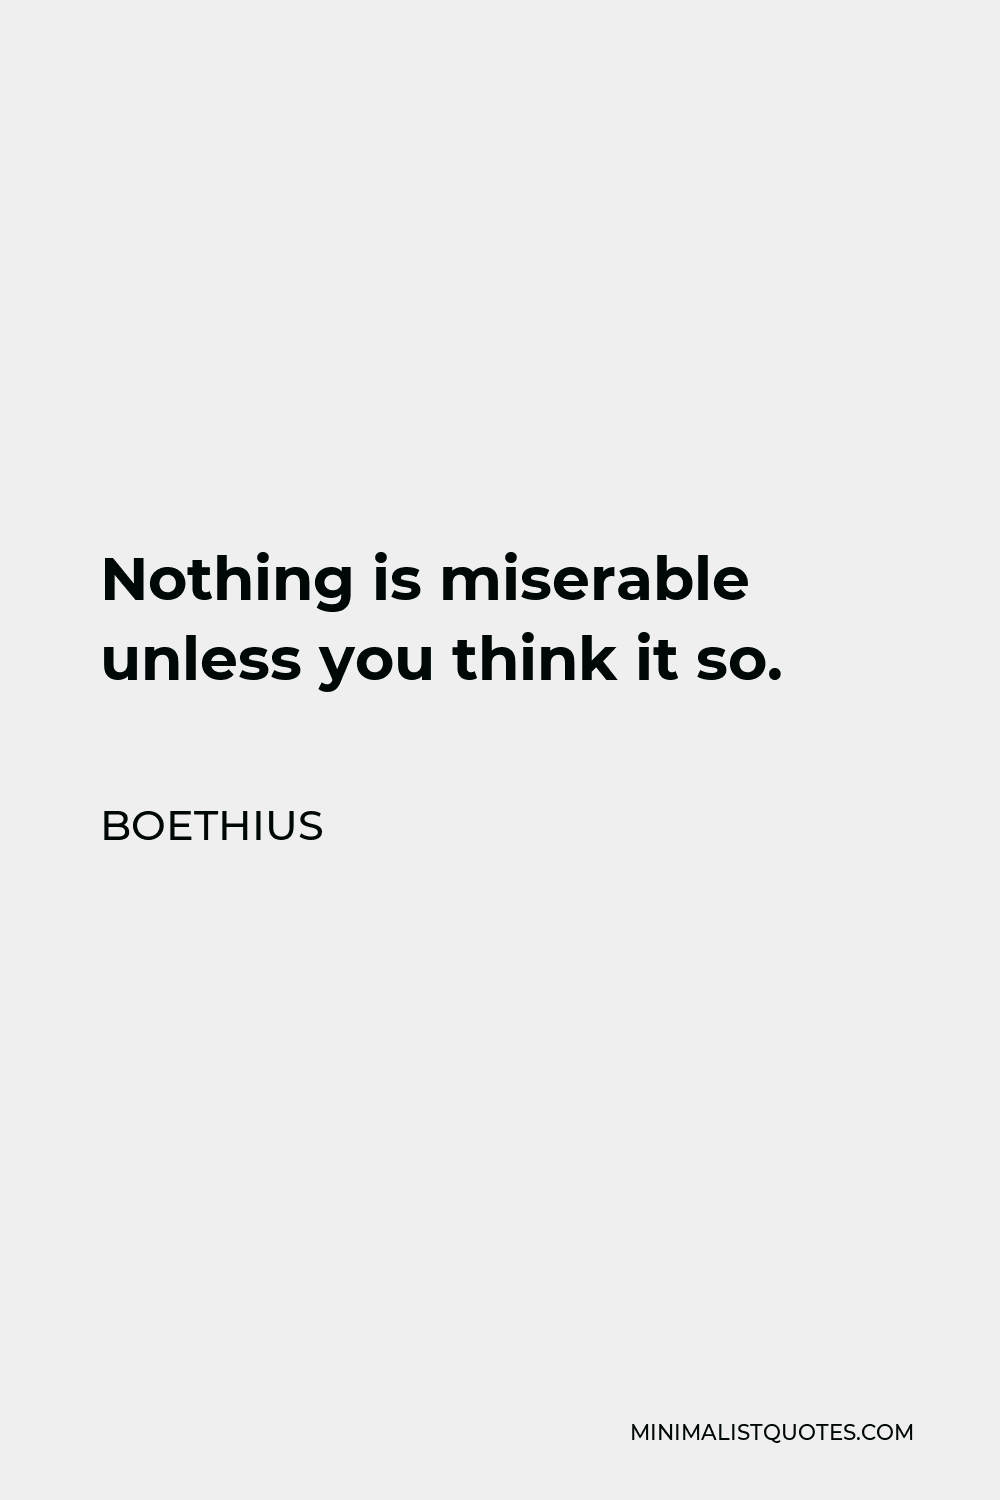 Boethius Quote - Nothing is miserable unless you think it so; and on the other hand, nothing brings happiness unless you are content with it.